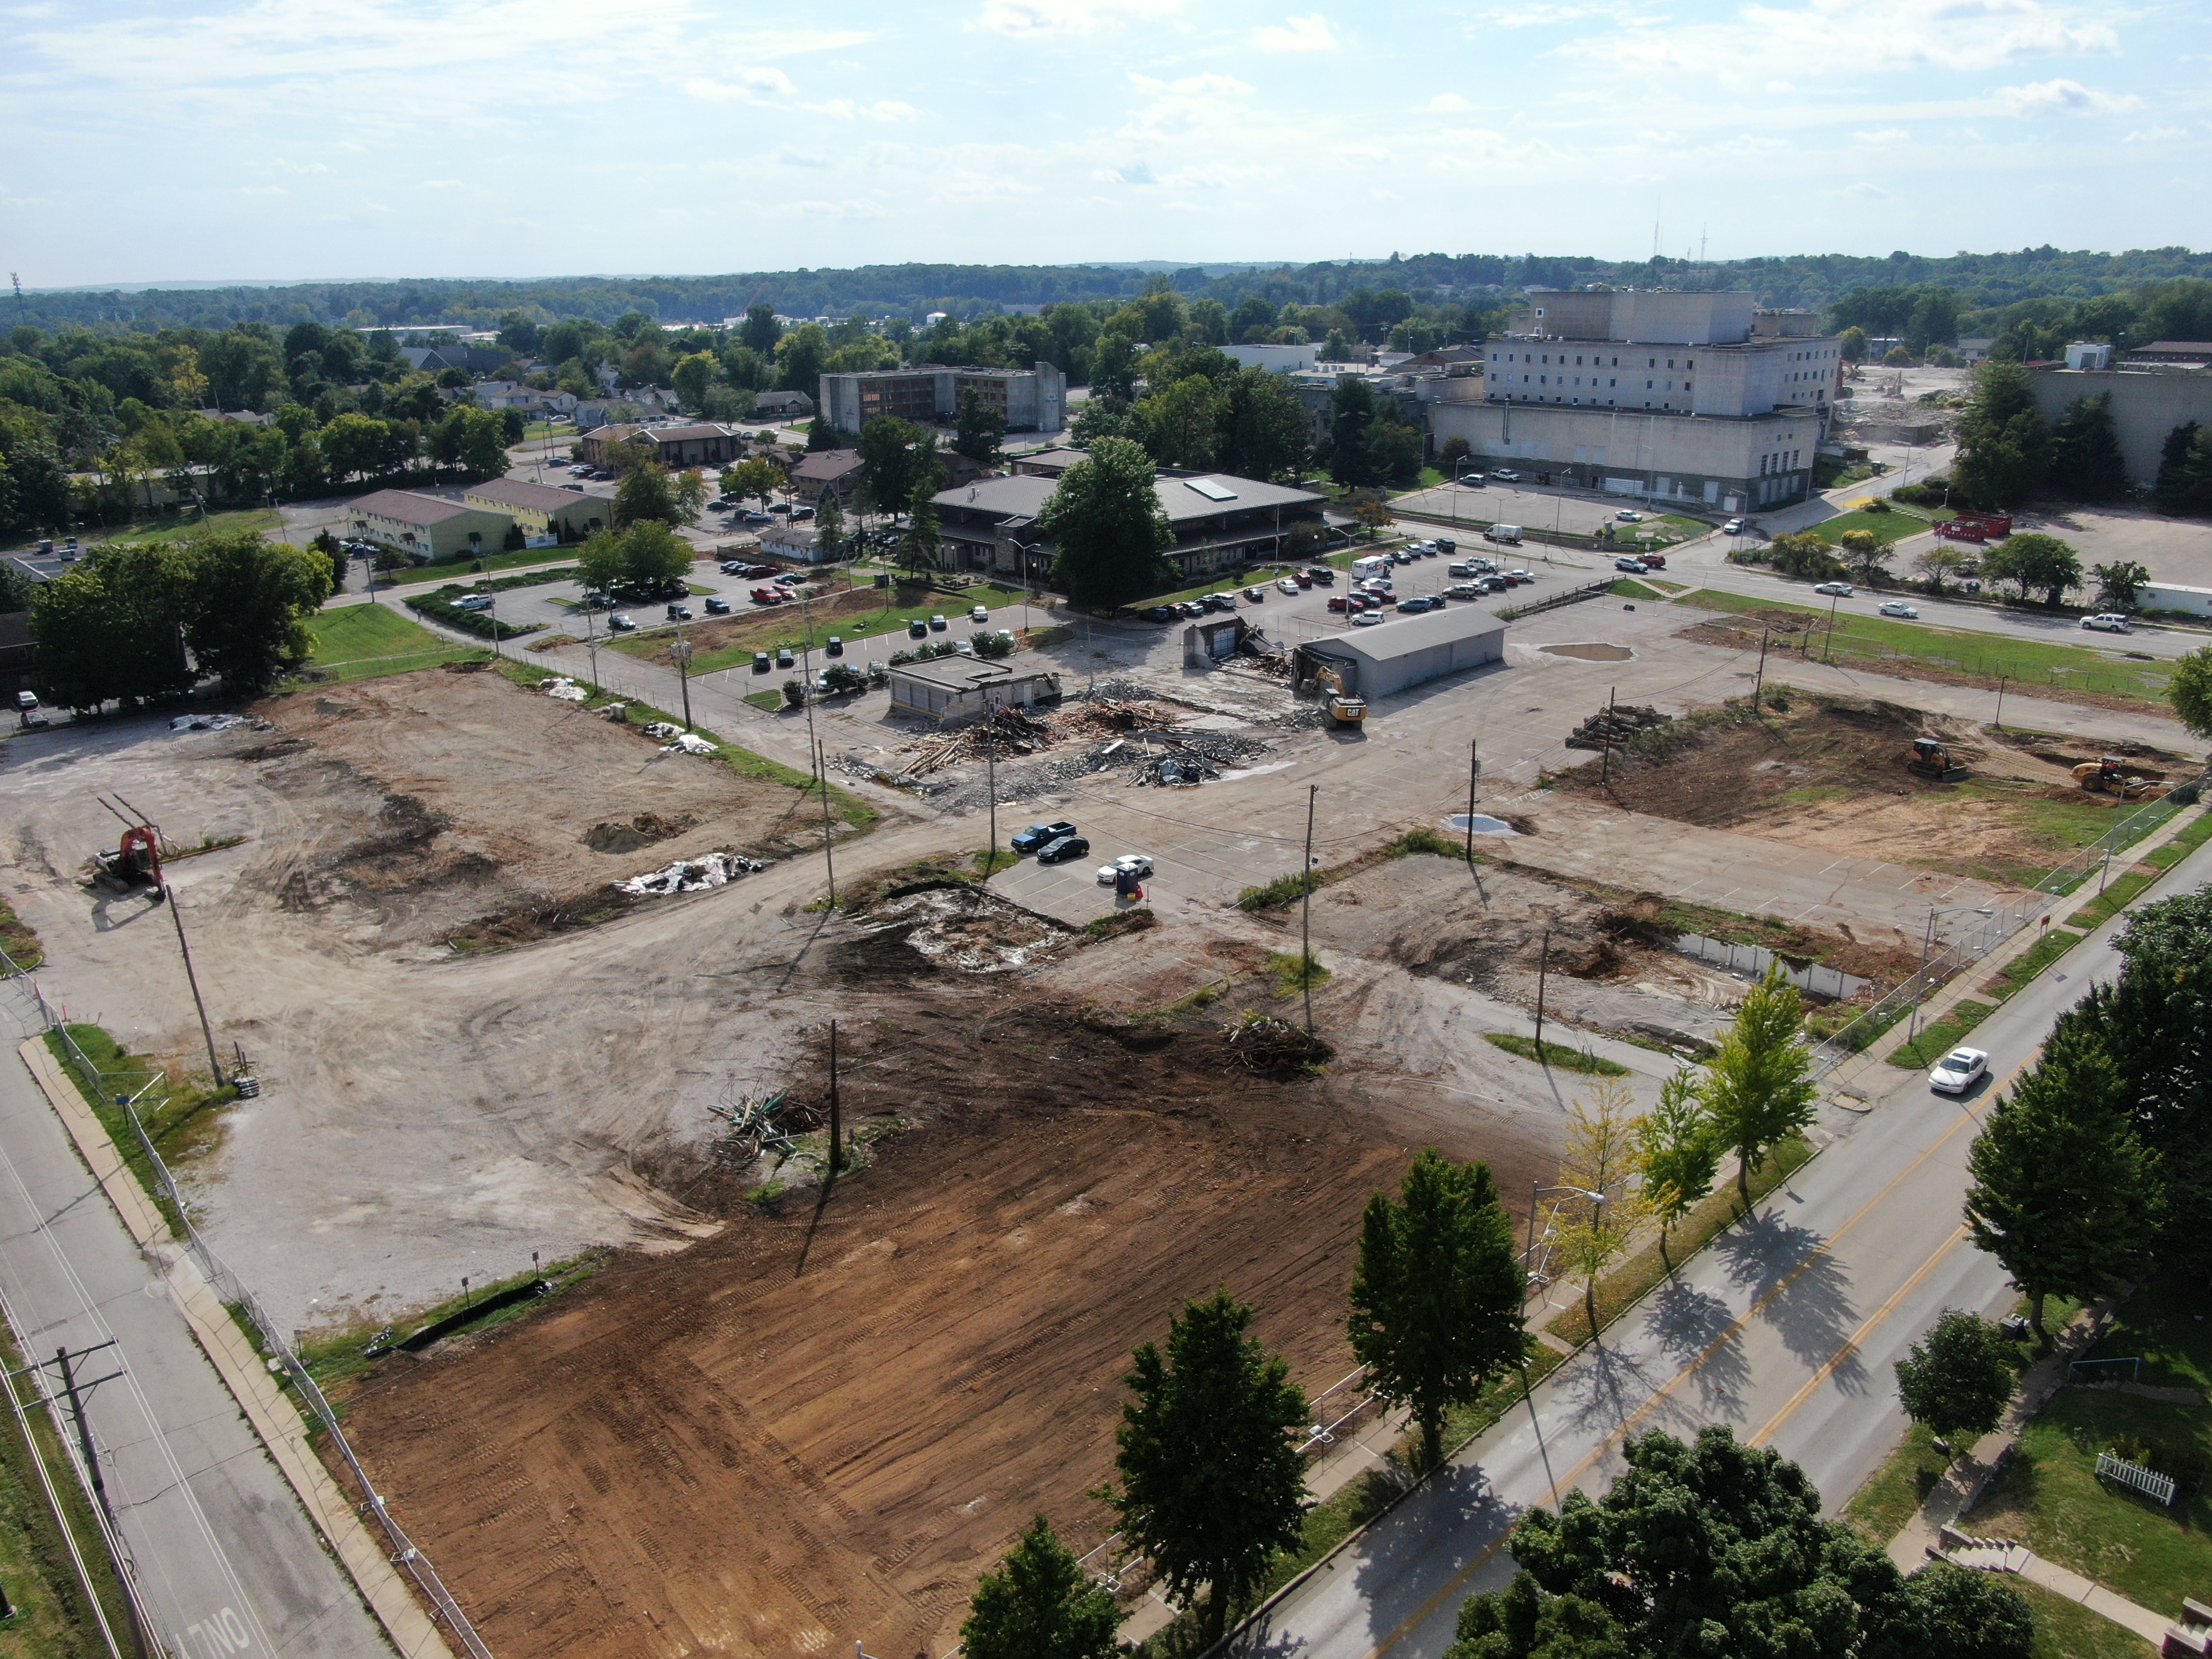 The right photo is looking southwest from the intersection of 2nd and Morton Street, there is a cleared site with exposed earth and the same equipment as the left photo working in the middle ground, the legacy hospital is shown in the background. 